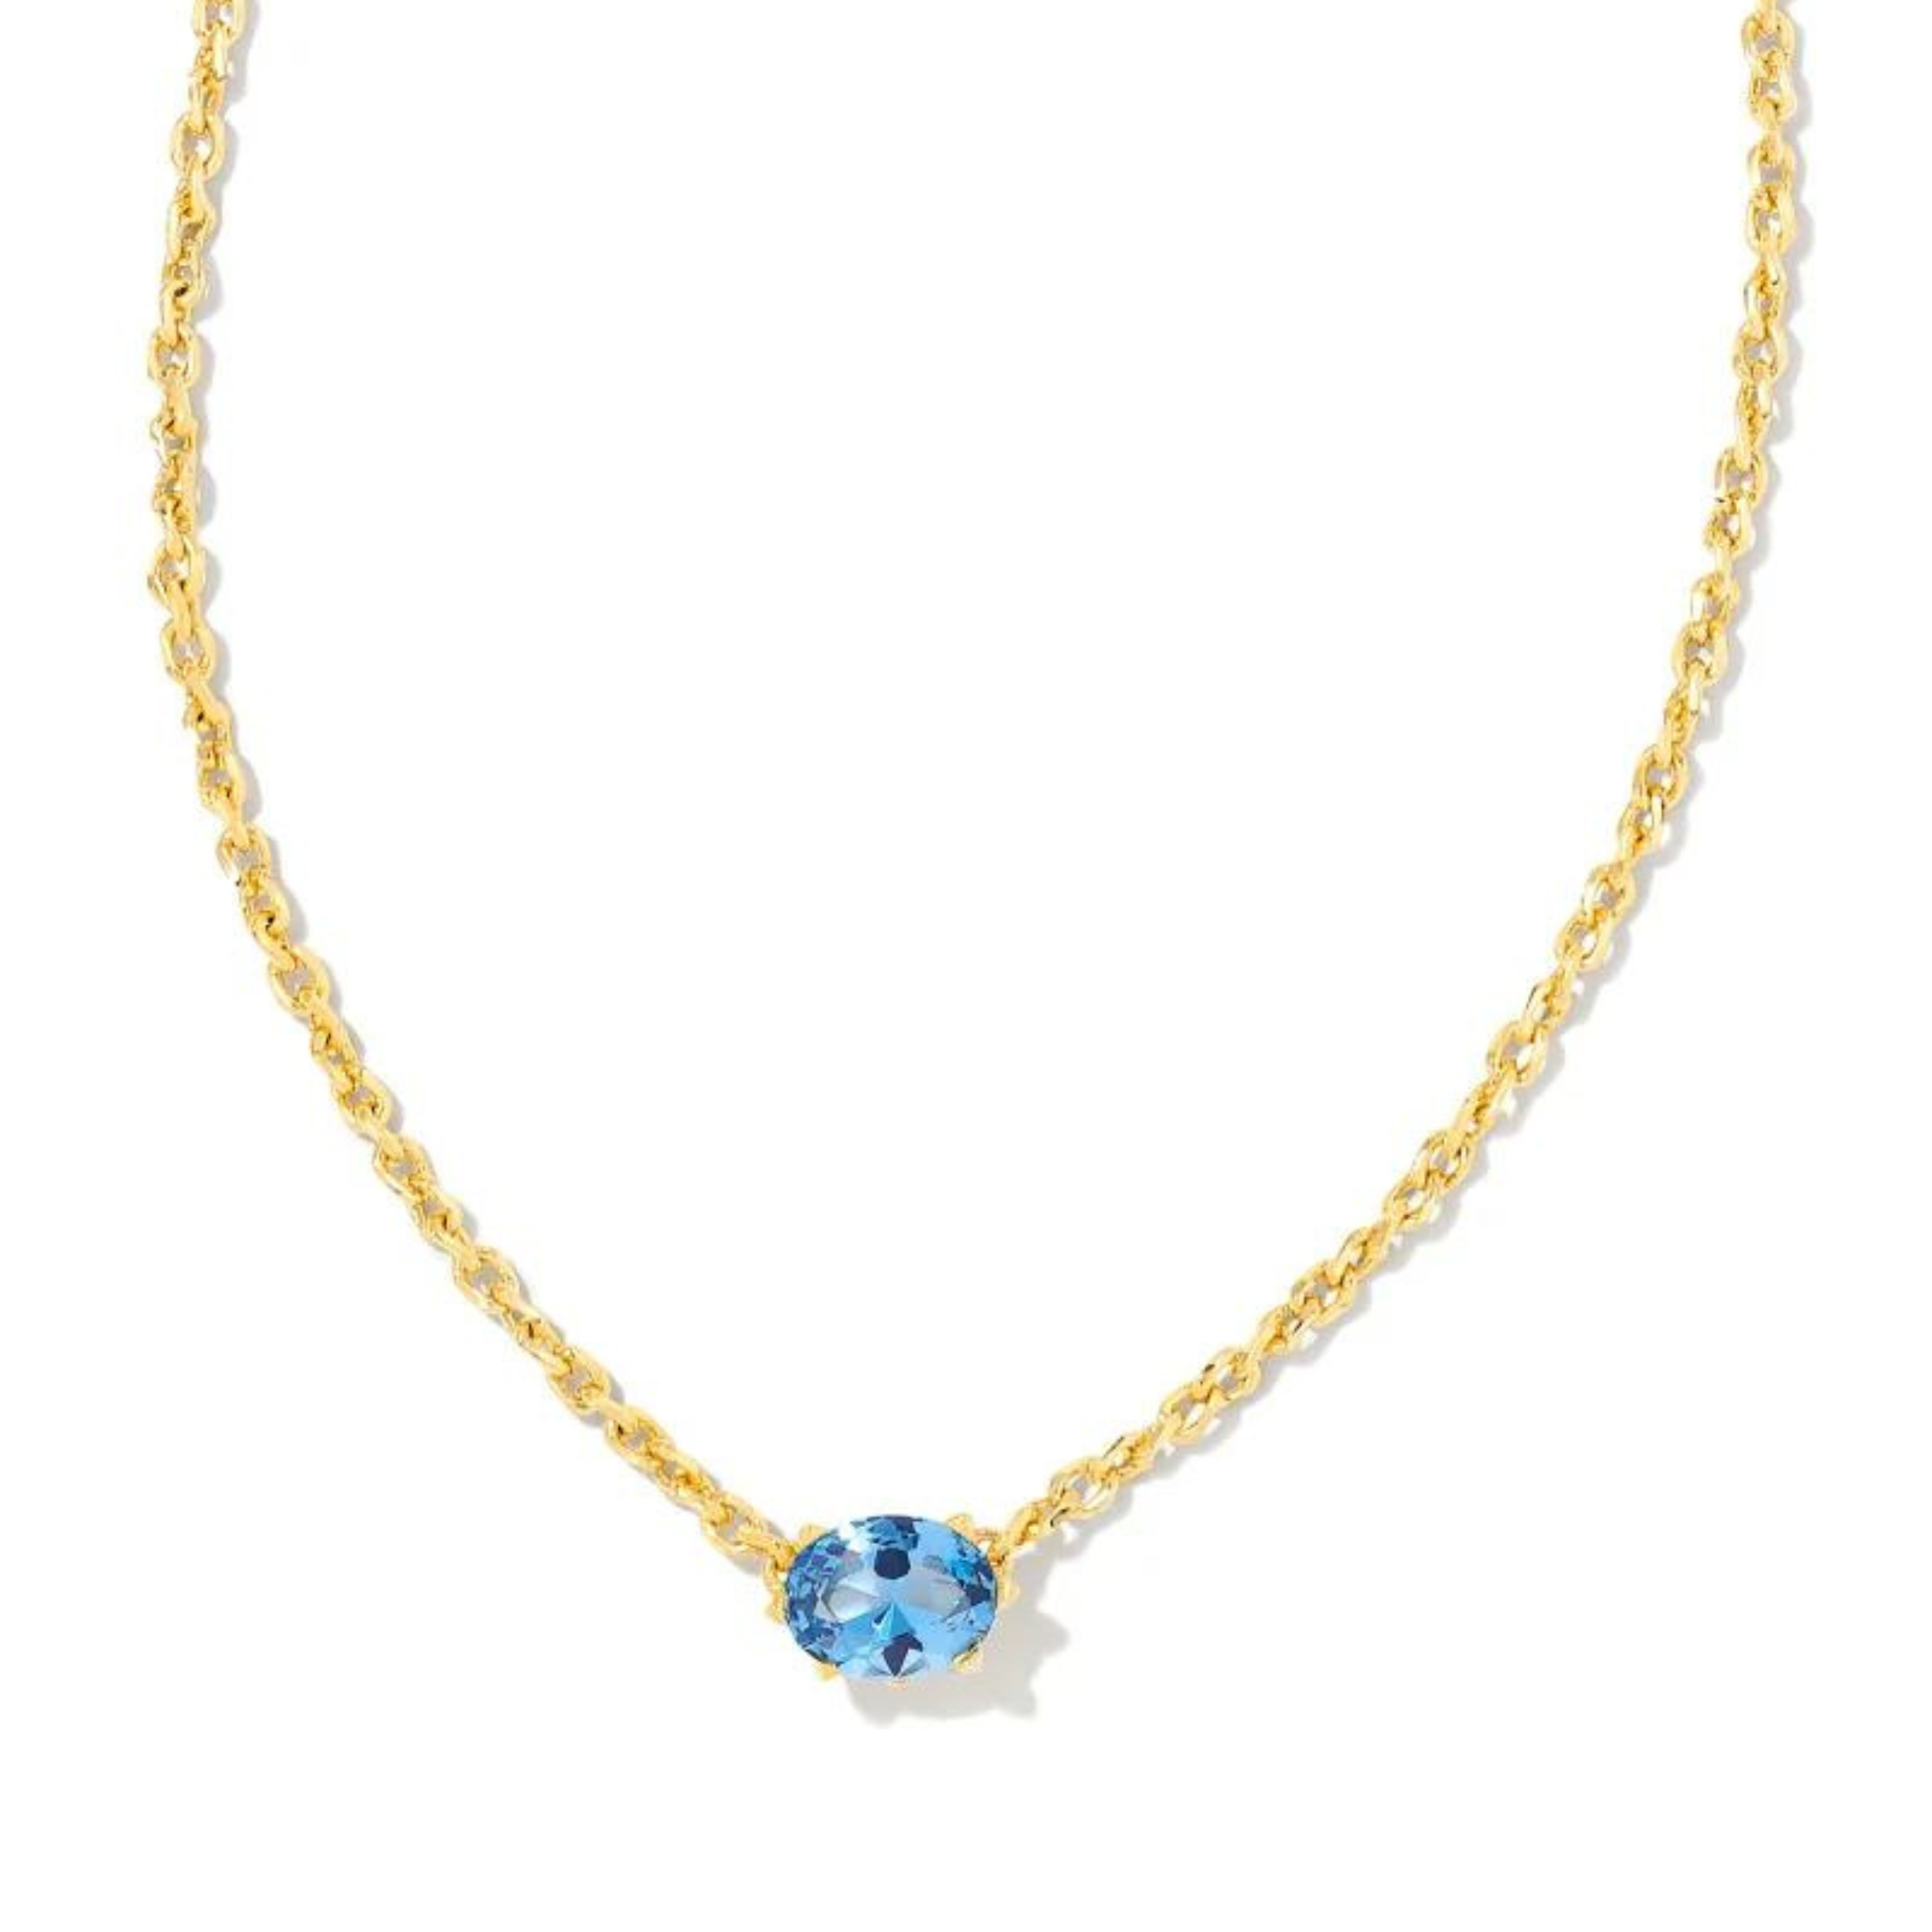 Gold chain necklace with a blue violet crystal pendant, pictured on a white background.